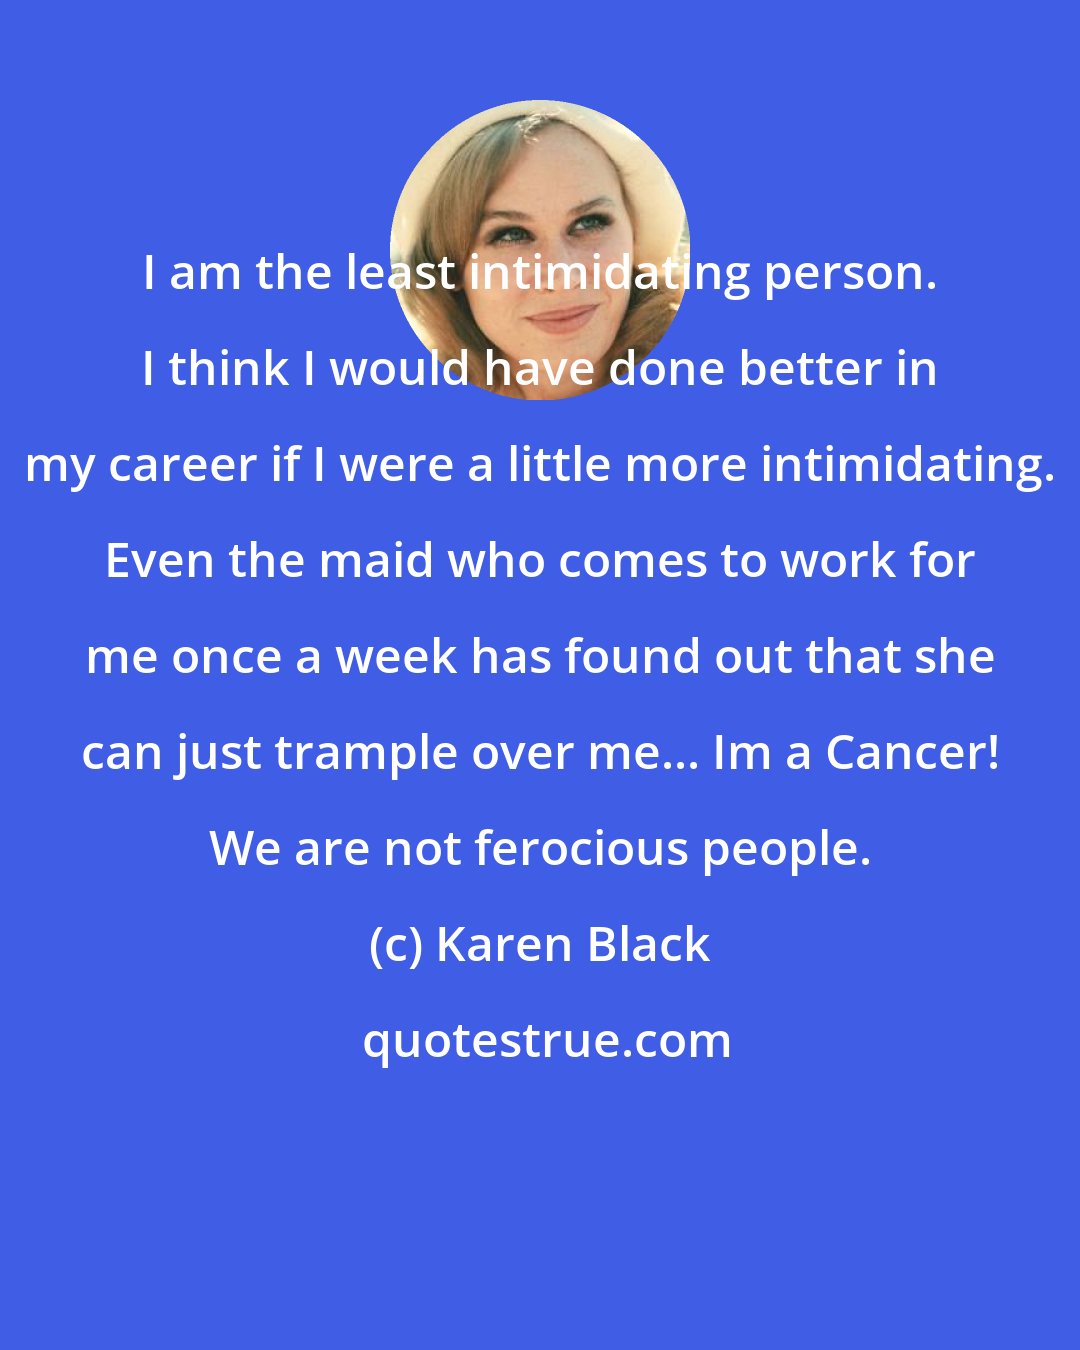 Karen Black: I am the least intimidating person. I think I would have done better in my career if I were a little more intimidating. Even the maid who comes to work for me once a week has found out that she can just trample over me... Im a Cancer! We are not ferocious people.